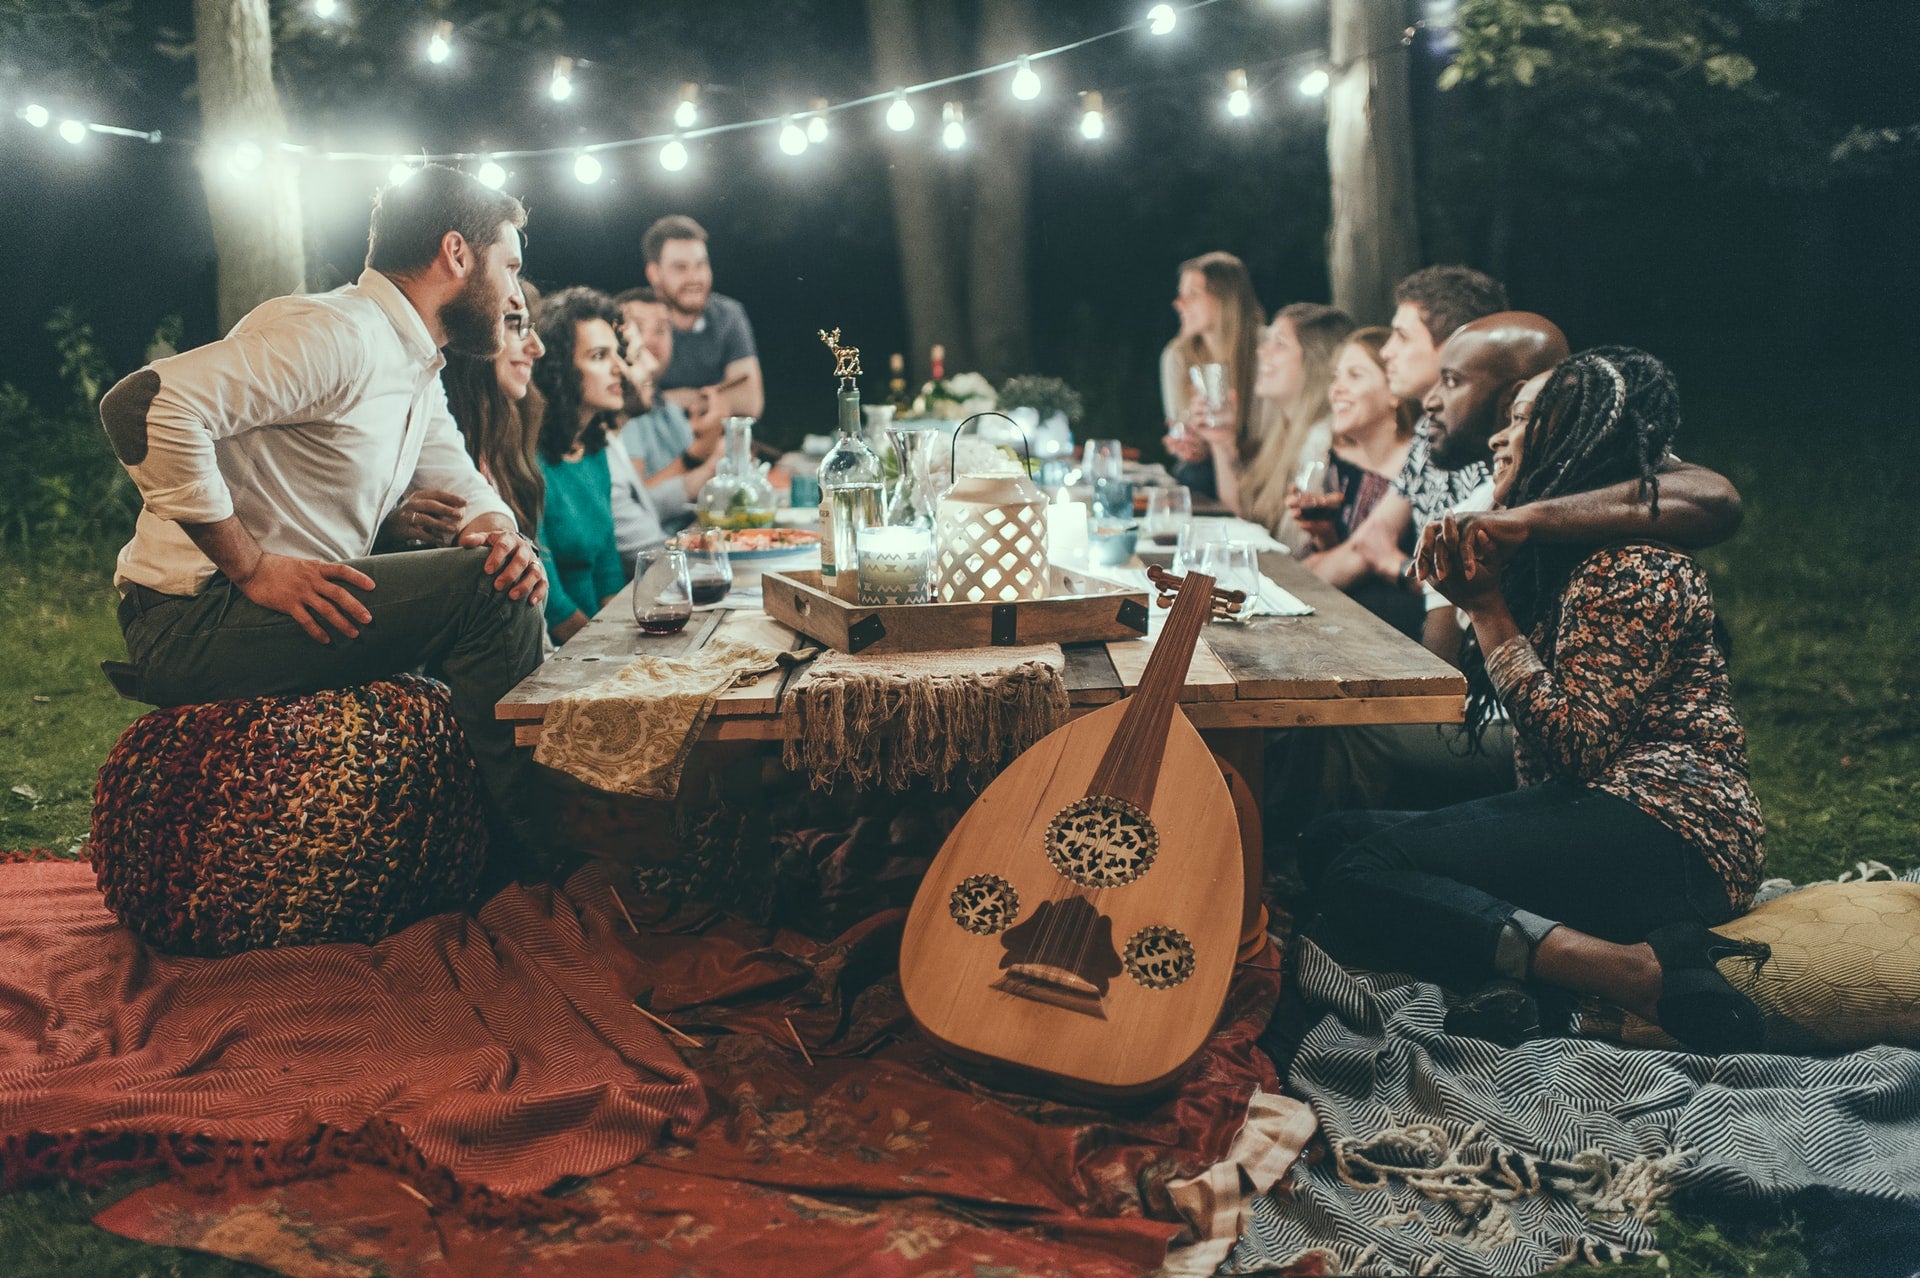 Wedding Rehearsal Dinner Ideas and Tips That You Should Not Miss!